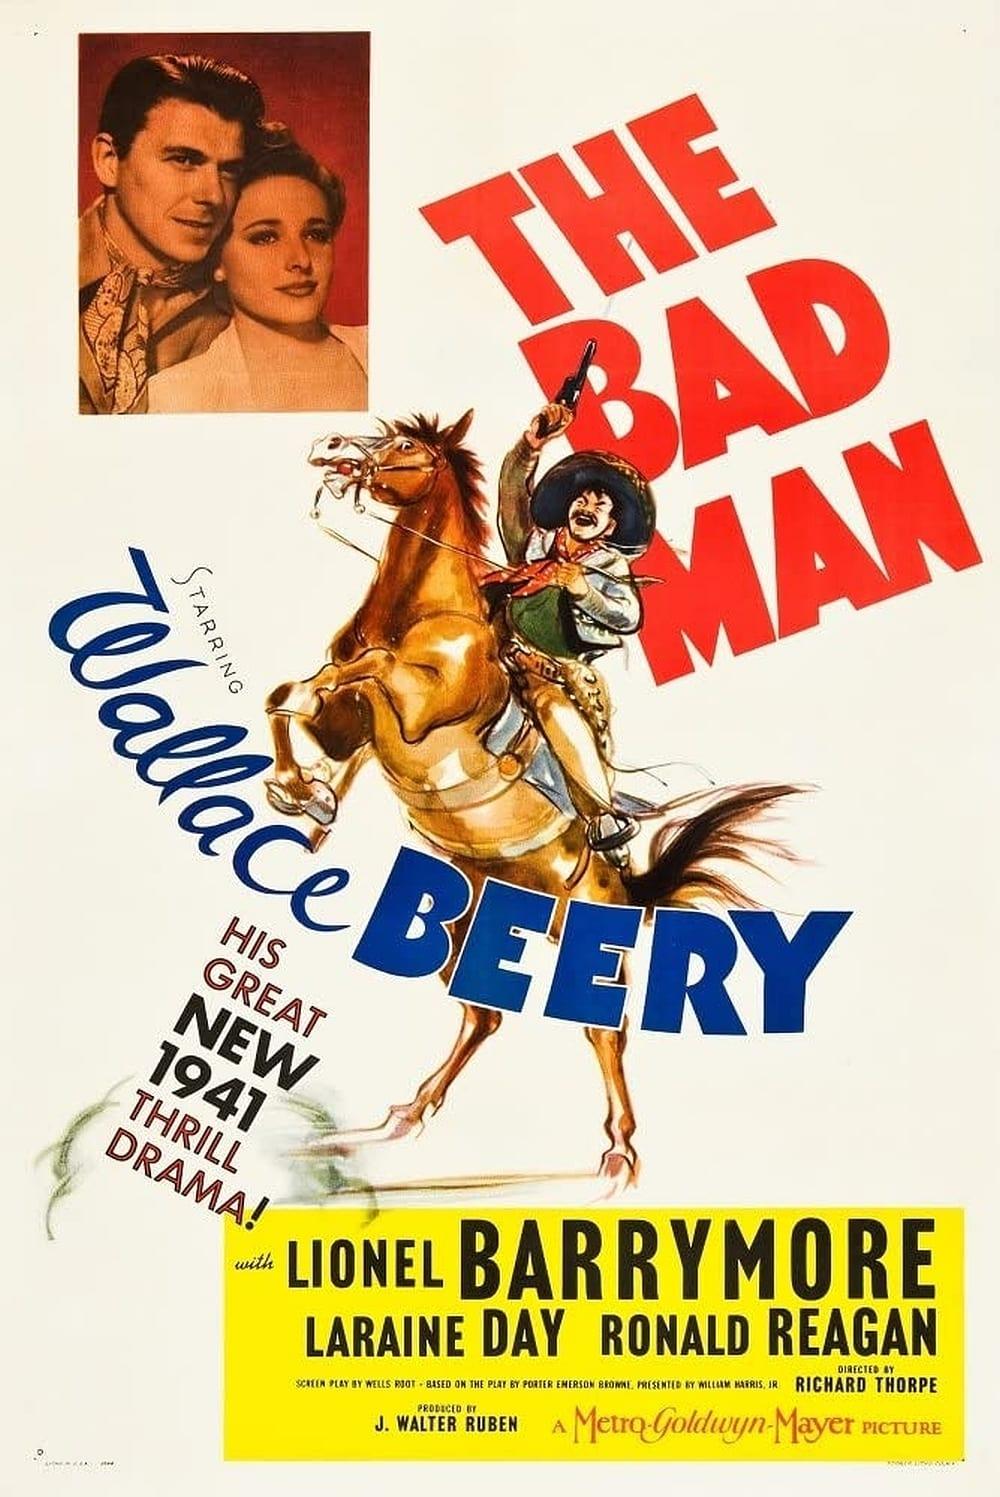 The Bad Man poster